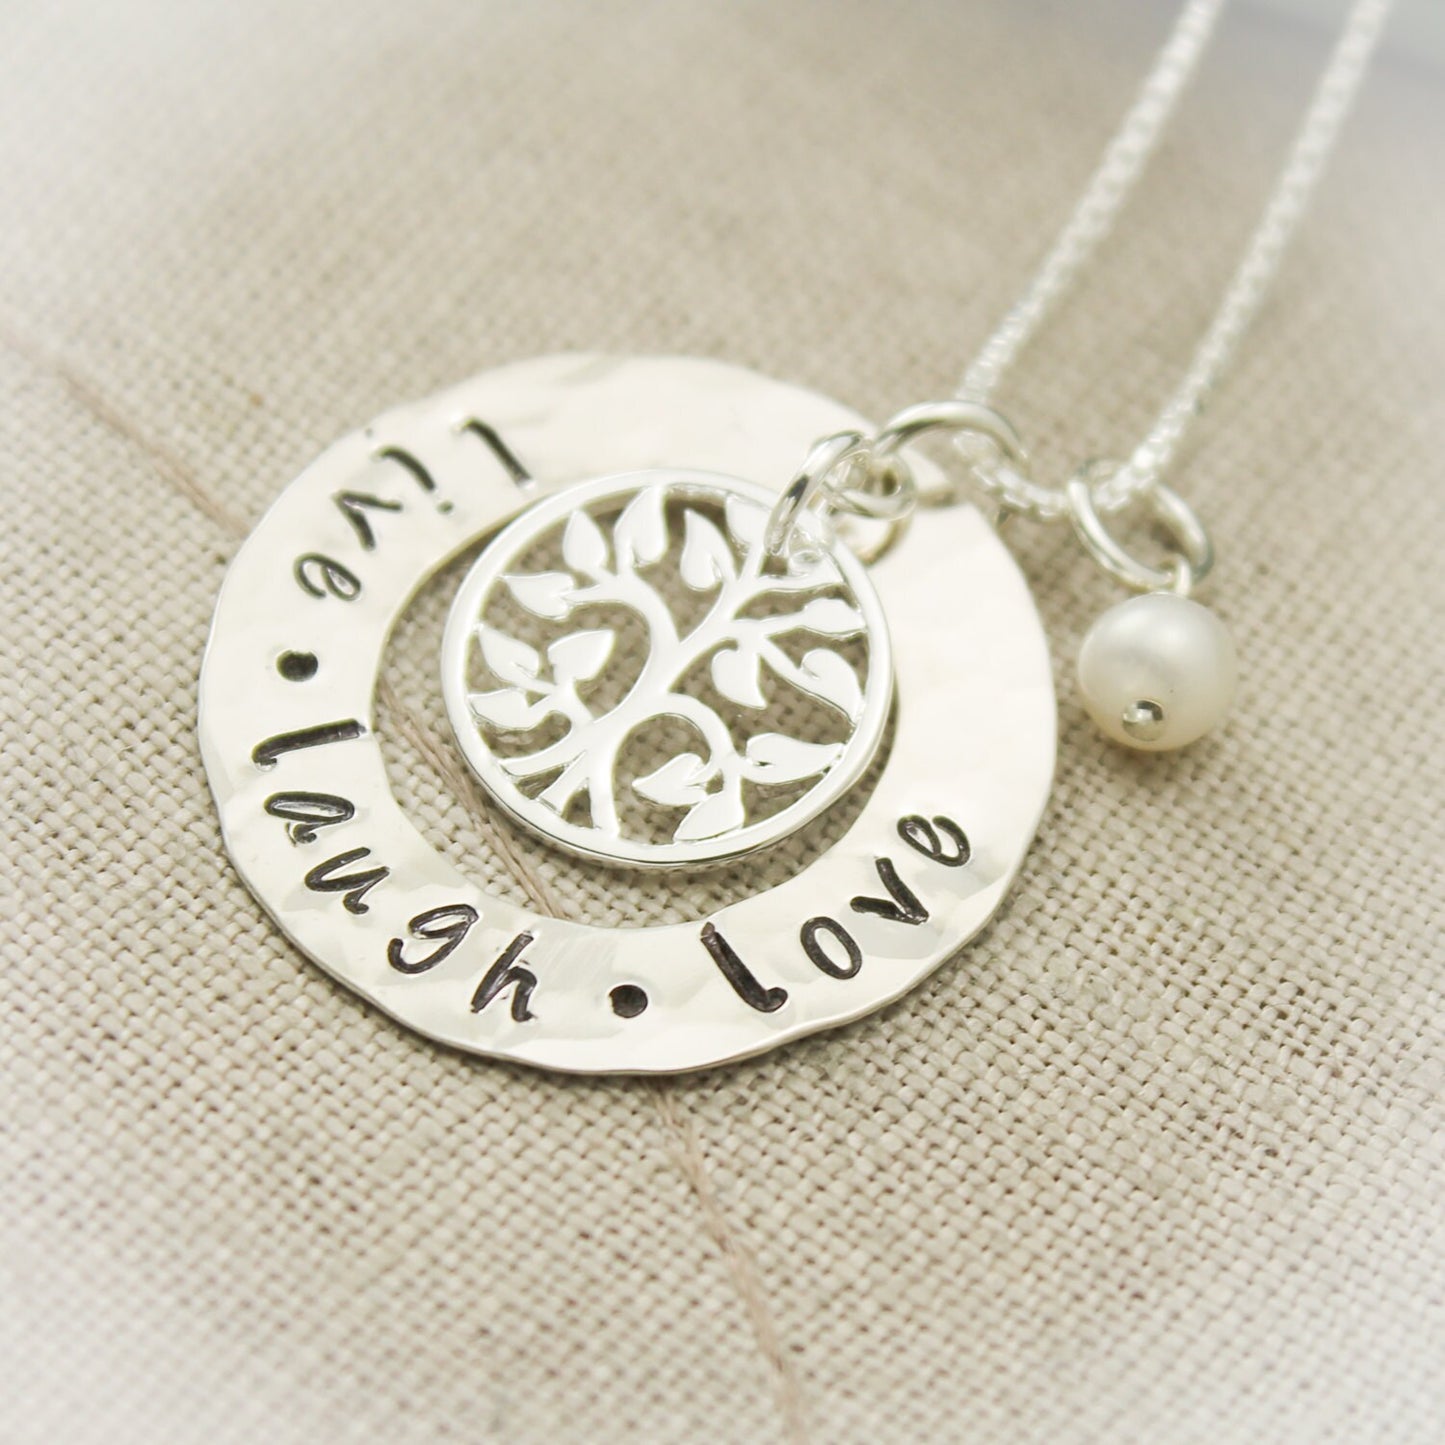 Family Tree Necklace - Personalized - Hand Stamped - Sterling Silver